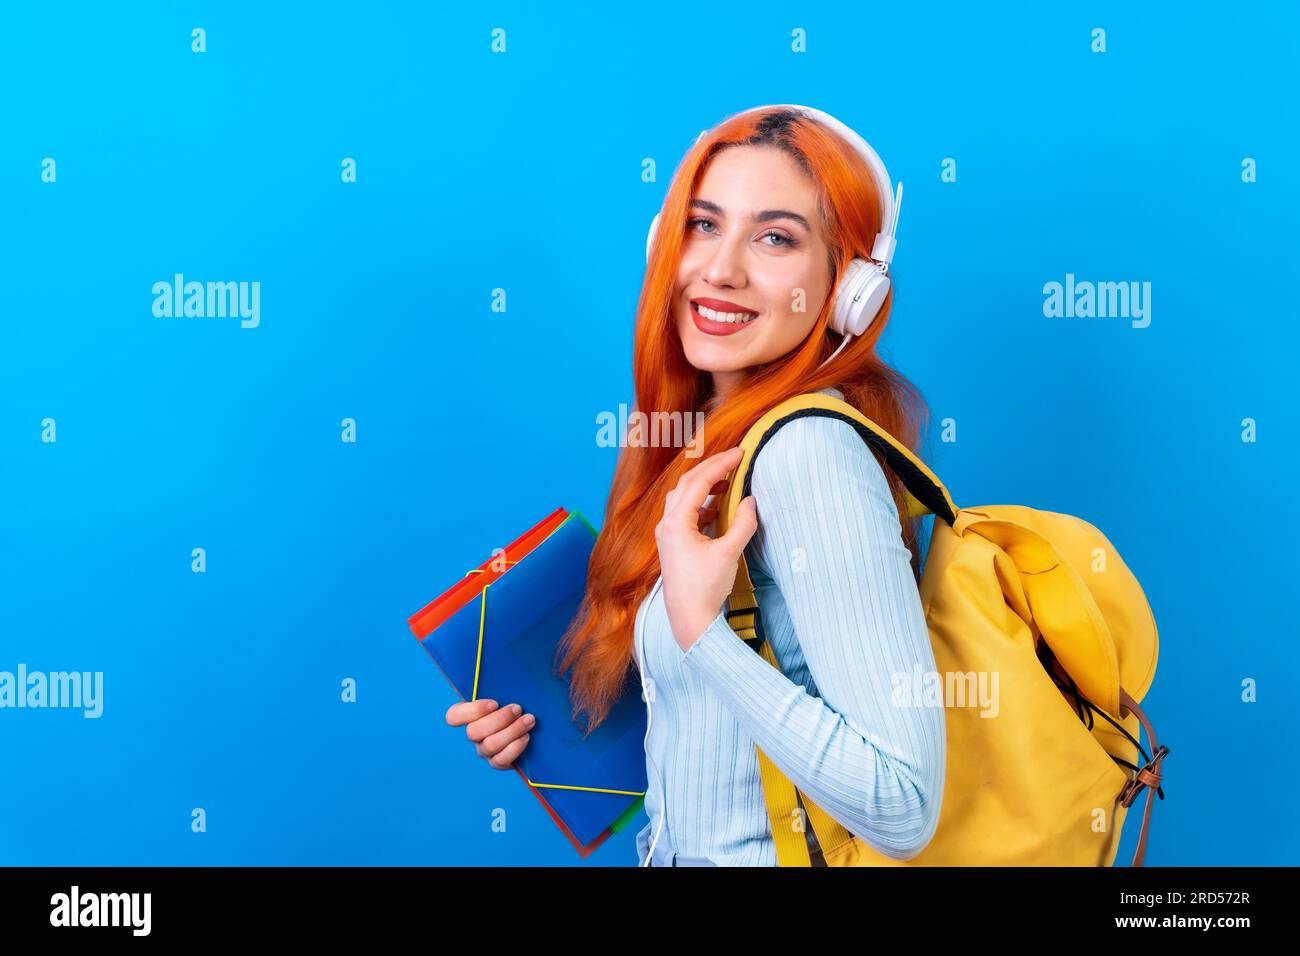 Redhead woman in studio photography dancing college student on a blue background, back to school Stock Photo